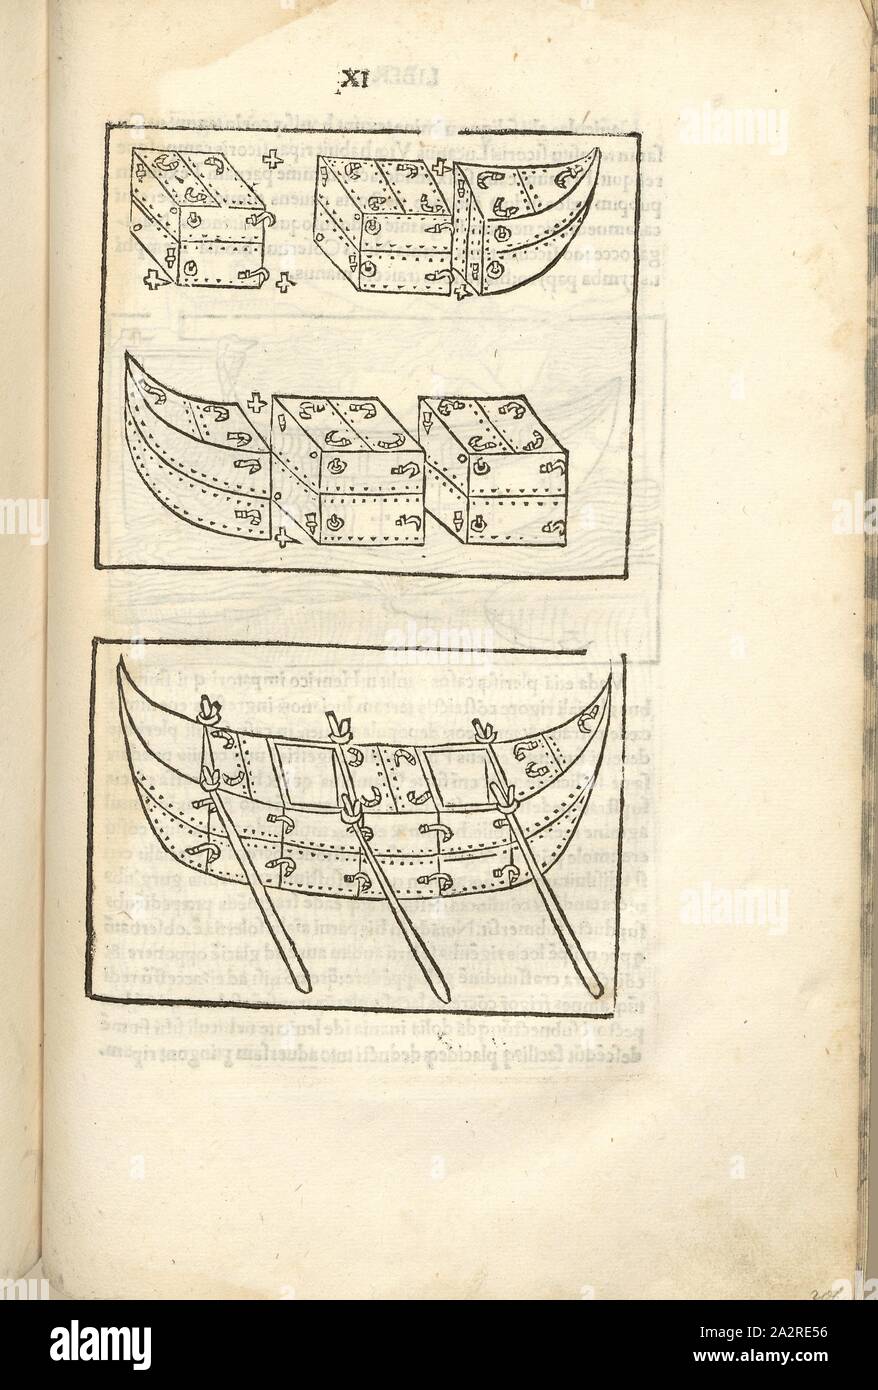 Dismountable ship parts, Warfare in the Middle Ages, military equipment, canoe, above: collapsible ship parts, below: composite ship with paddle, crossing water, woodcut, S. 419, (Liber undecimus), 1483, Roberto Valturio: [De re militari]. Verona: [Boninus de Boninis], [1483 Stock Photo